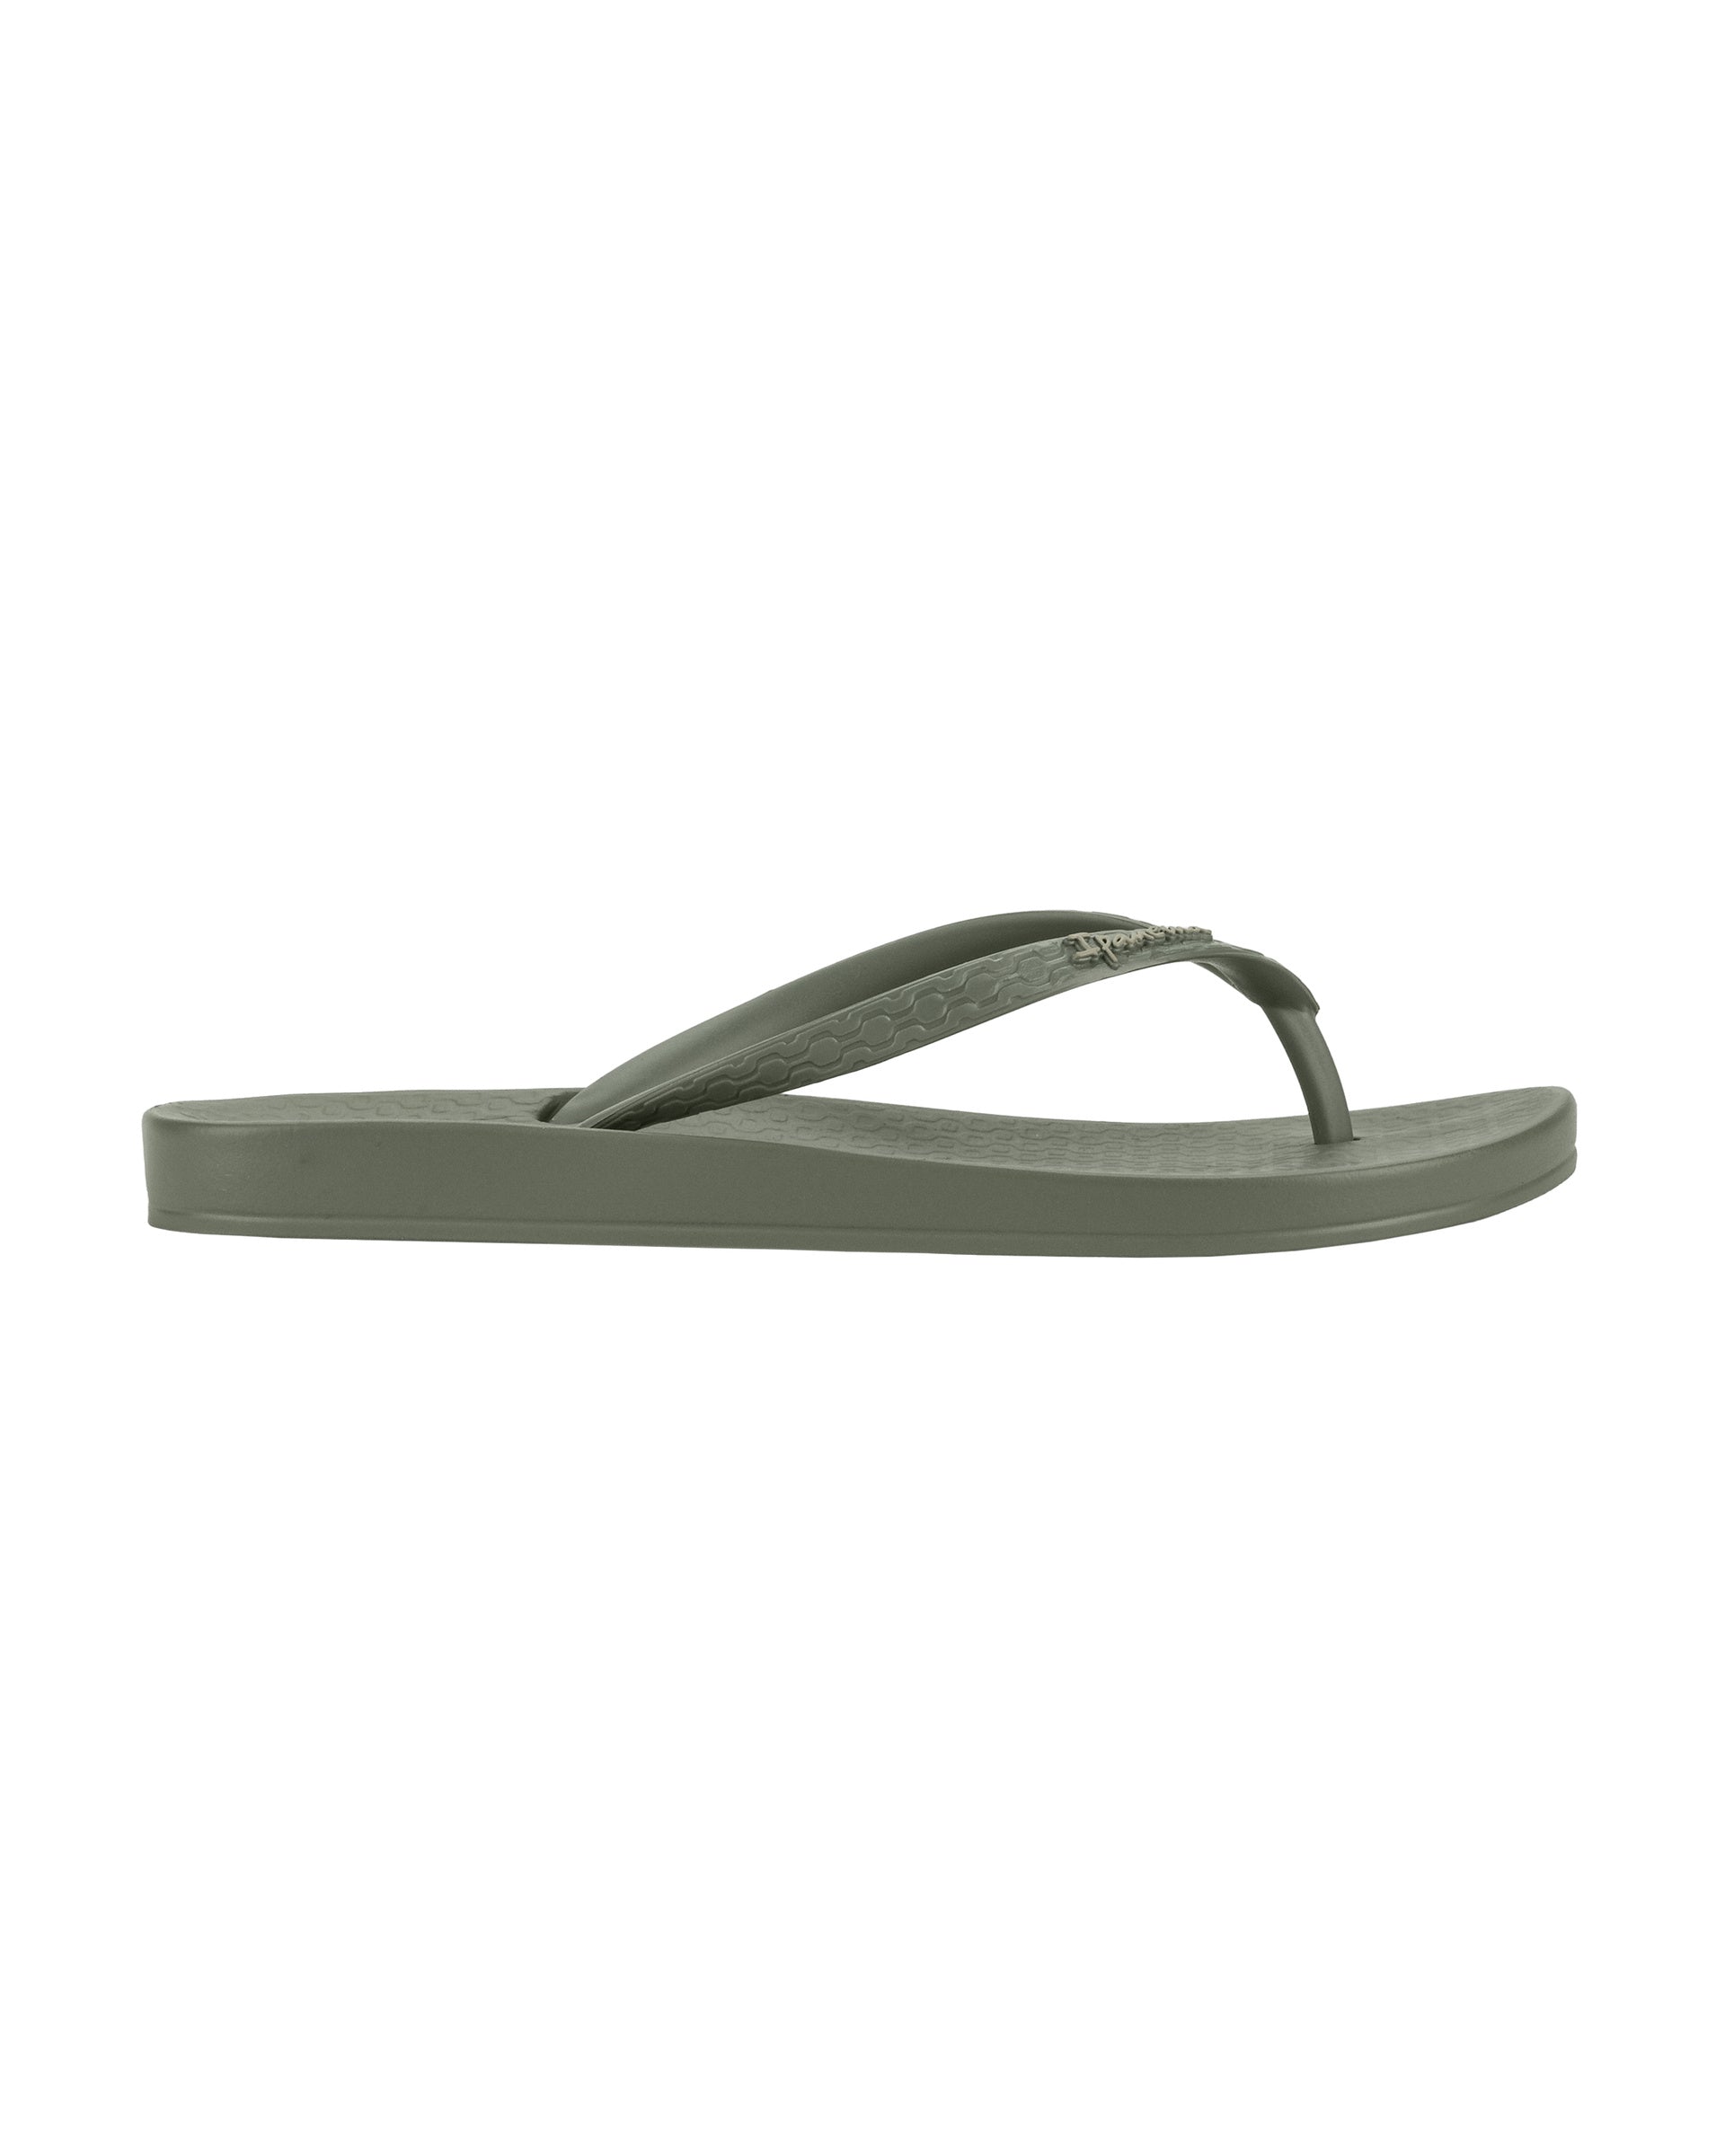 Outer side view of a green Ipanema Ana Colors women's flip flop.